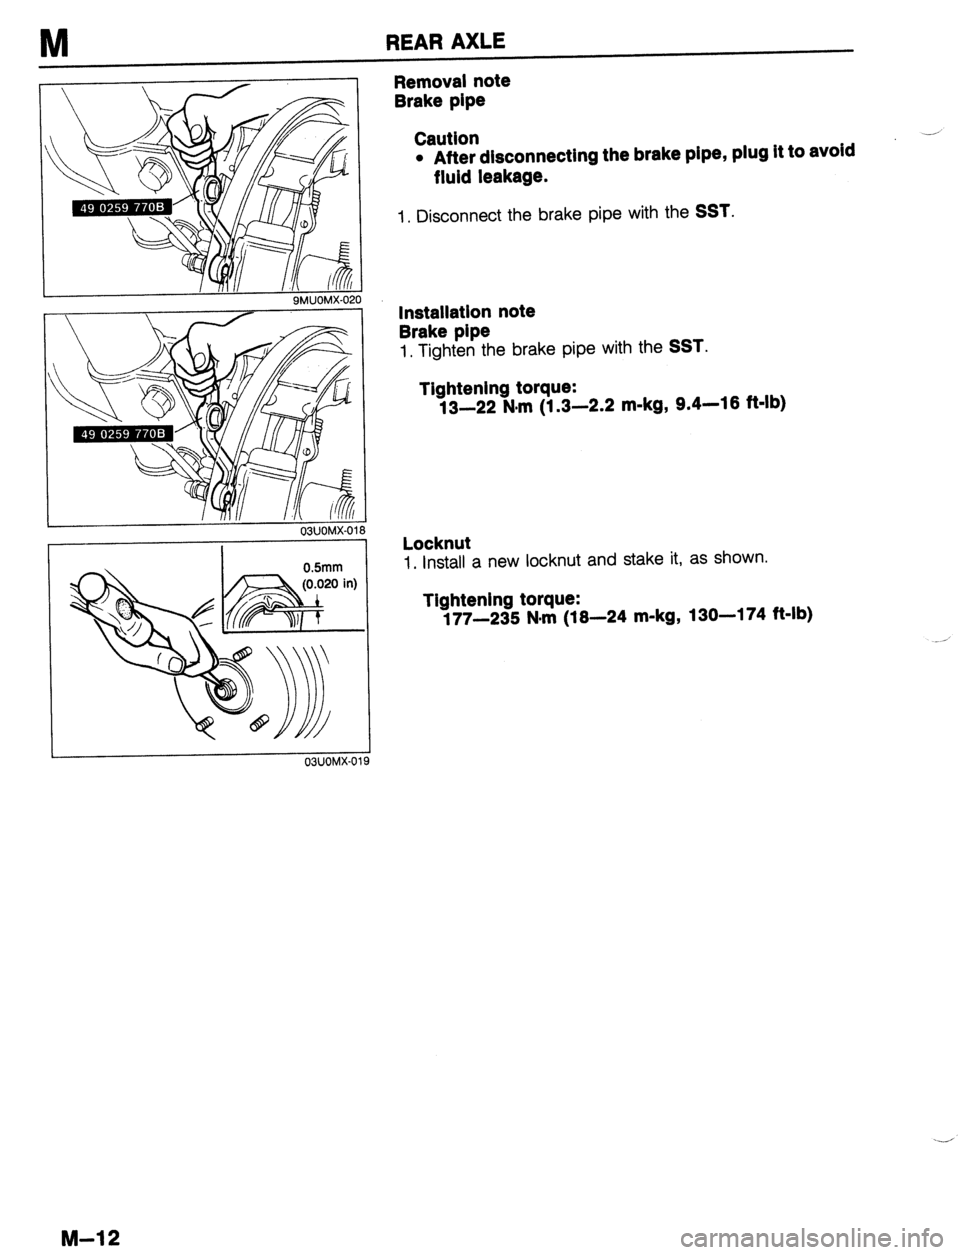 MAZDA PROTEGE 1992  Workshop Manual M REAR AXLE 
!O 
03UOMX-01 0 
0.5mm 
19 
Removal note 
Brake pipe 
Caution 
l After disconnecting the brake pipe, plug it to avoid 
fluid leakage. 
1. Disconnect the brake pipe with the SST. 
lnstalla